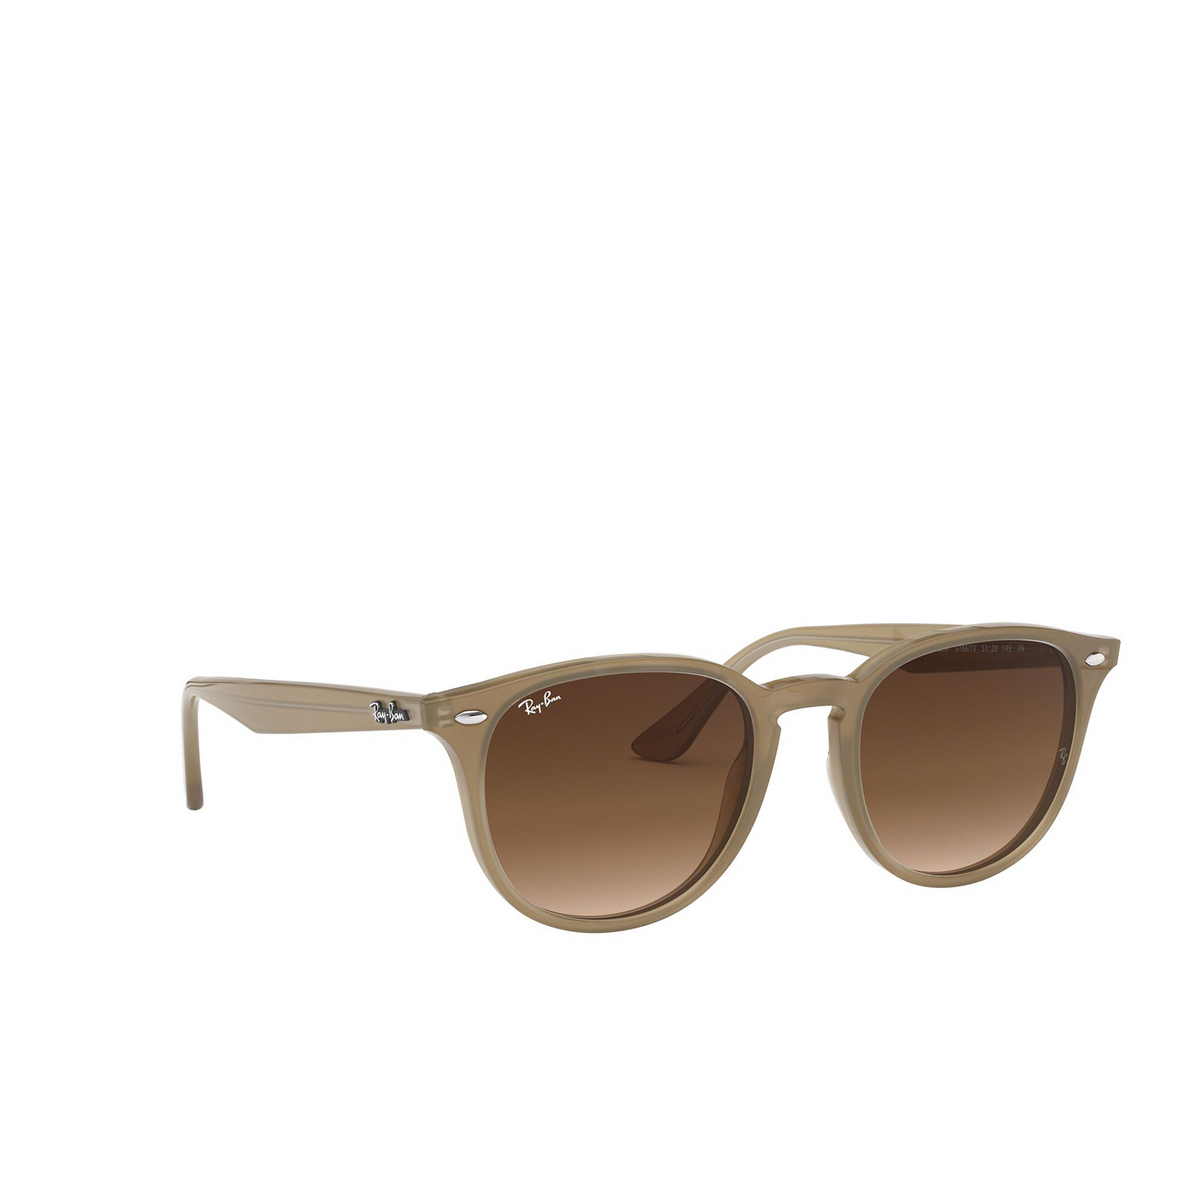 Ray-Ban® Round Sunglasses: RB4259 color Opal Beige 616613 - three-quarters view.